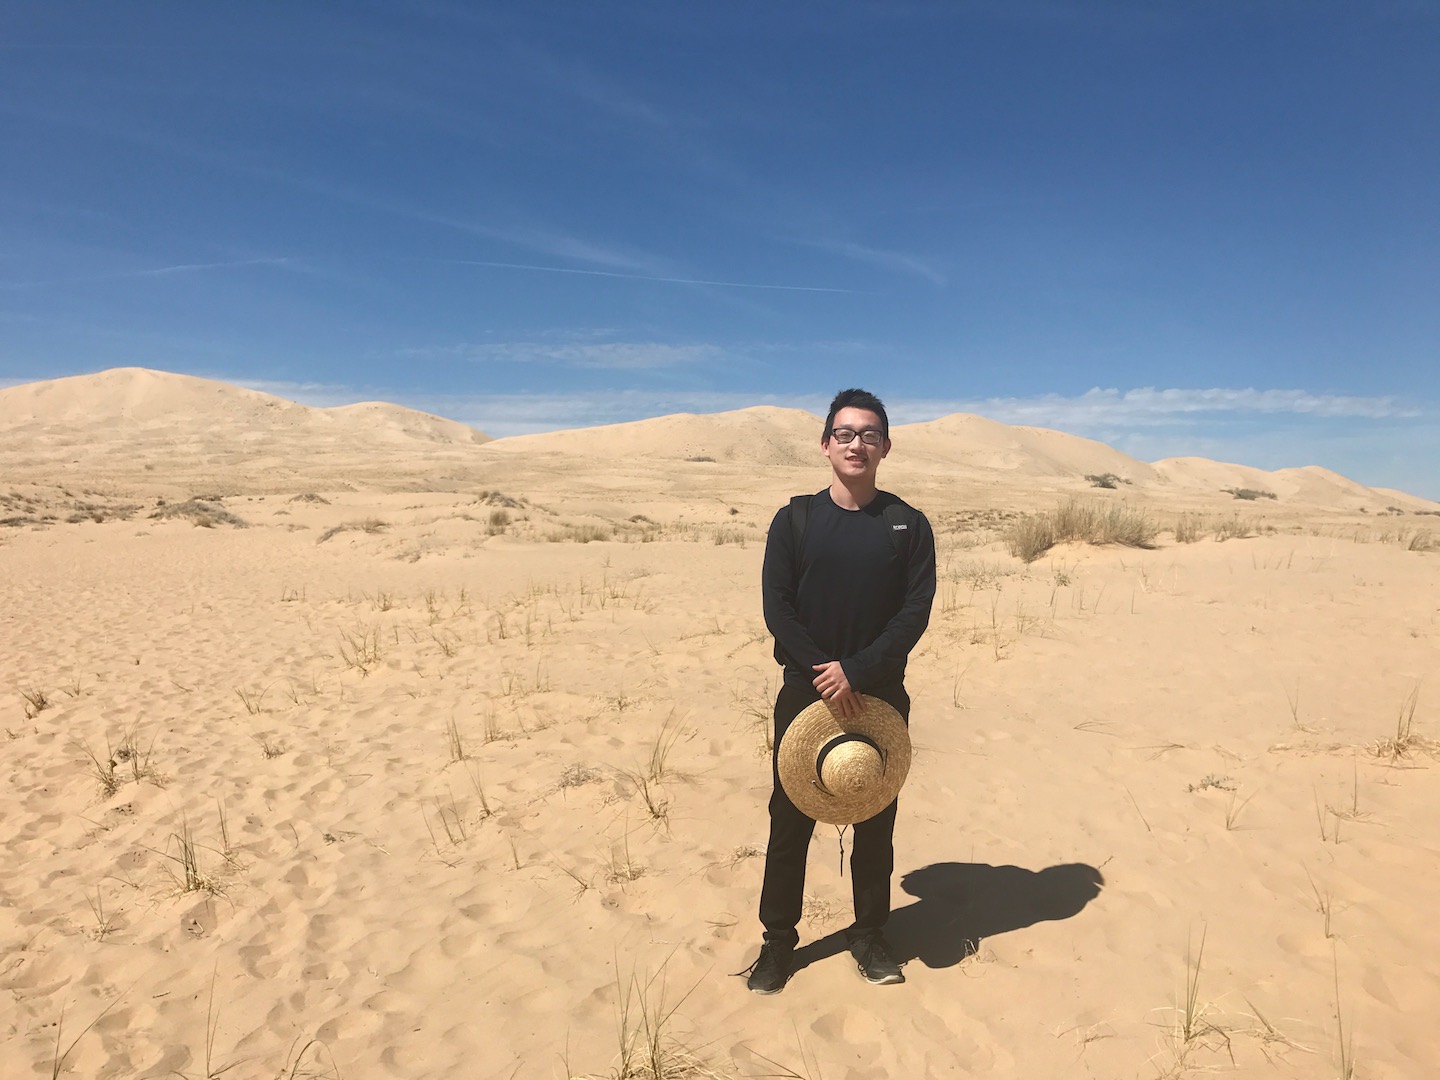 The face of someone who does not yet realize how much he's underestimated these sand dunes